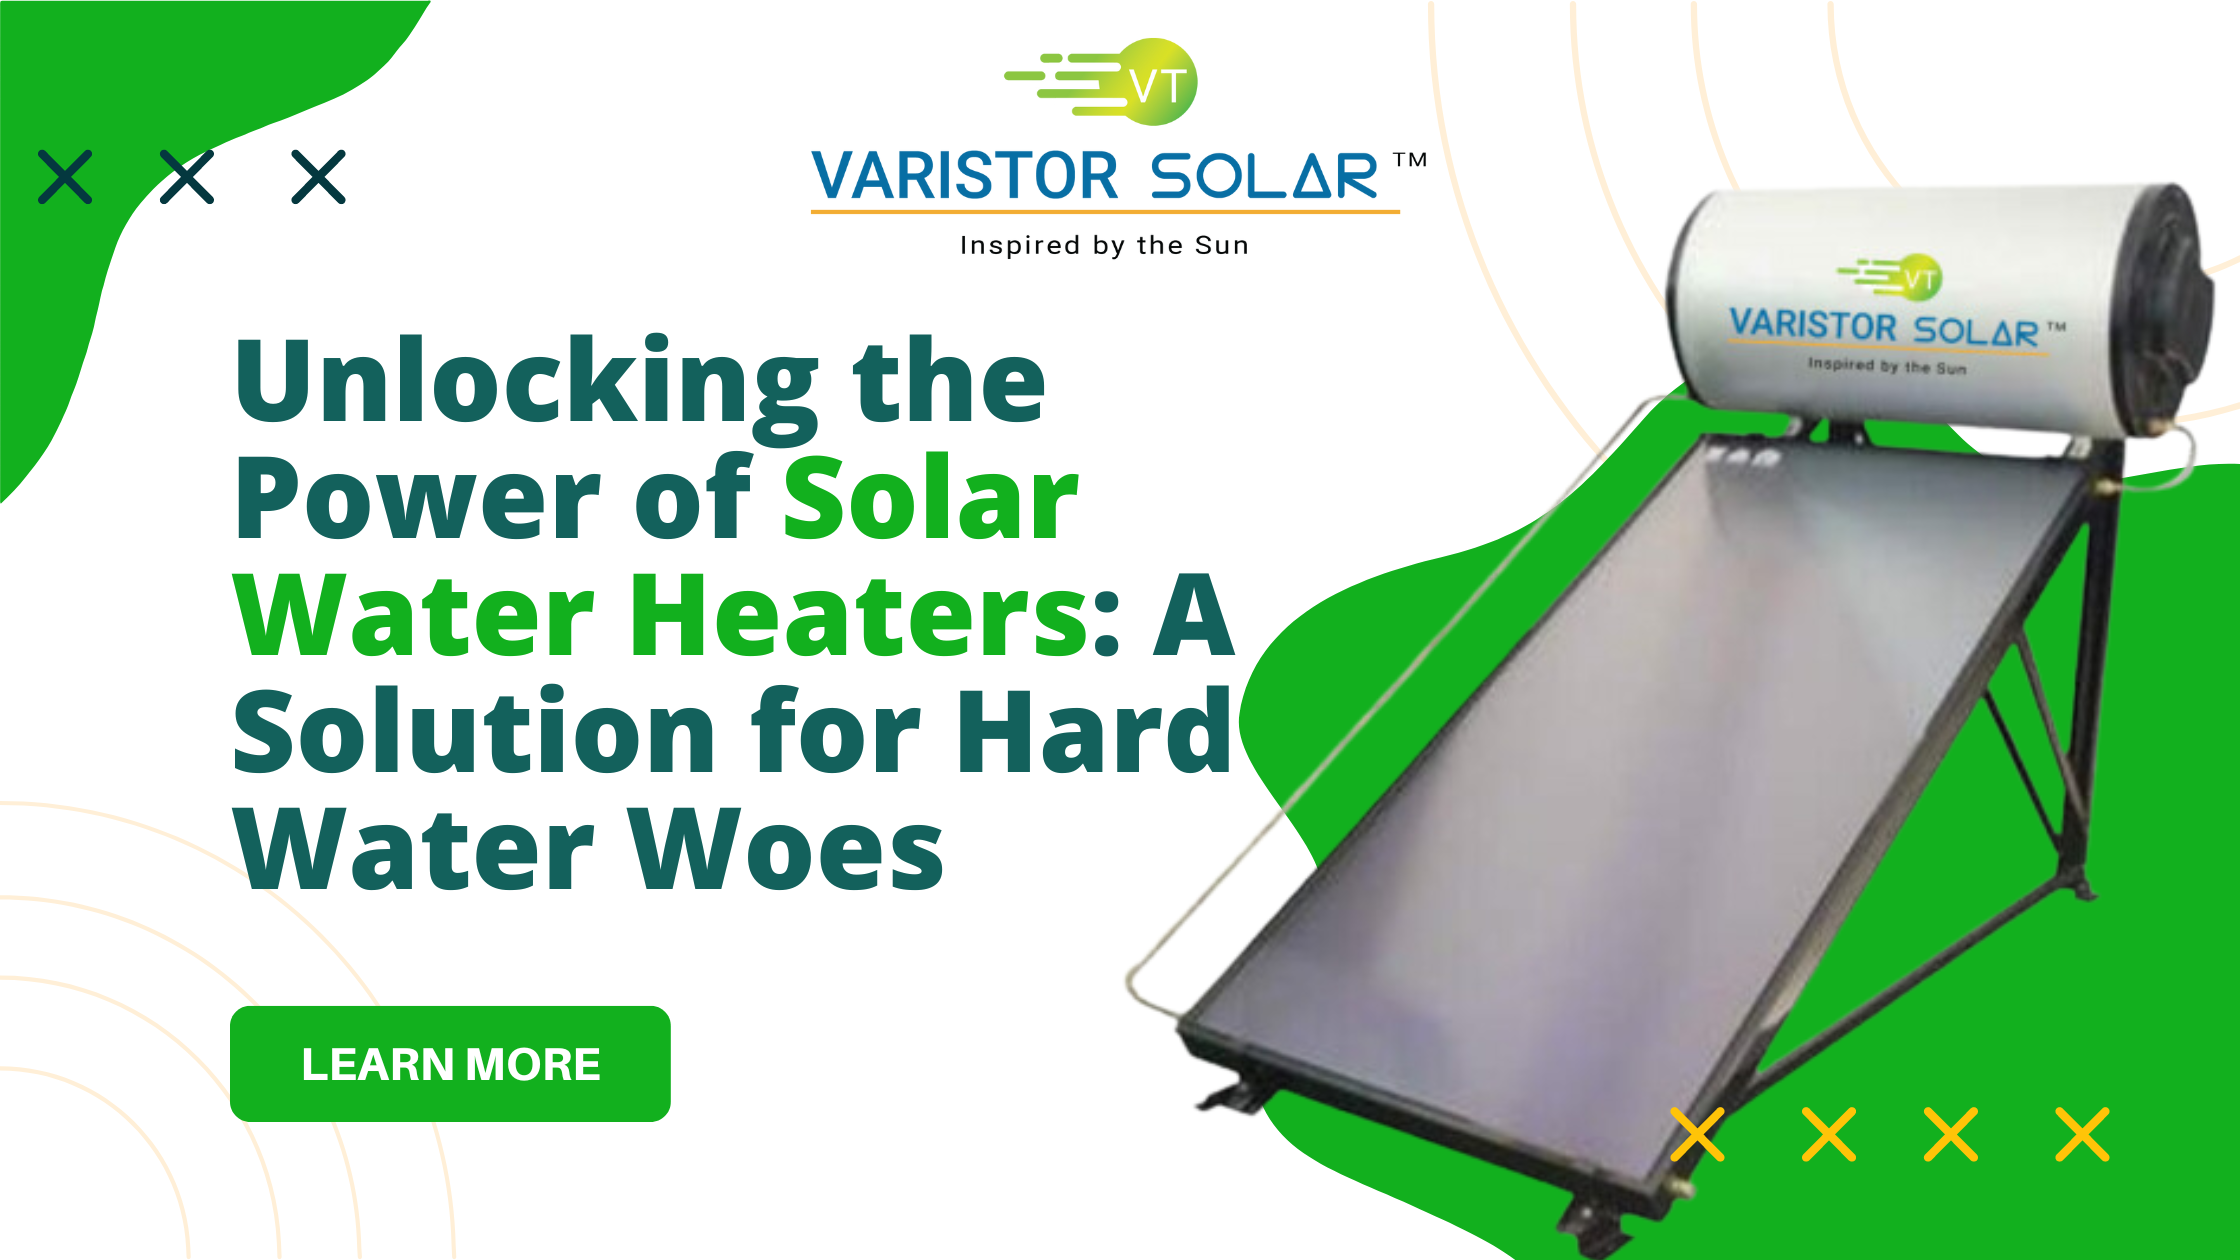 Unlocking the Power of Solar Water Heaters: A Solution for Hard Water Woes